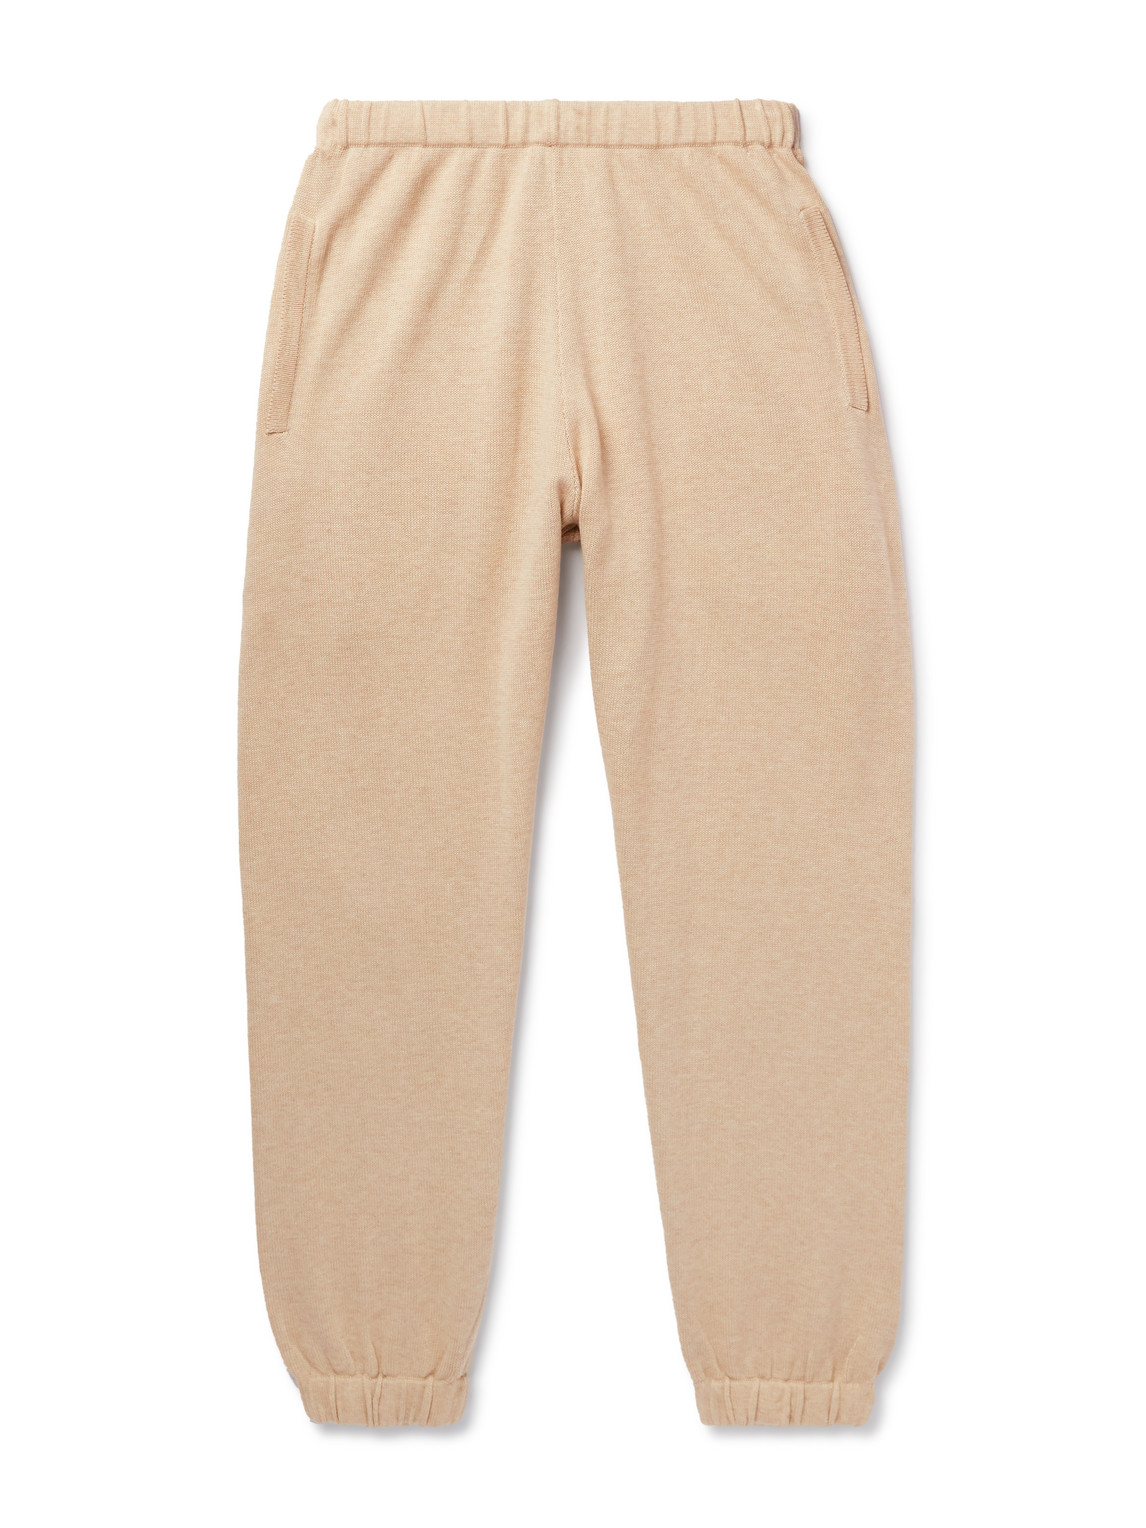 Ghiaia Cashmere Tapered Ribbed Cotton Sweatpants